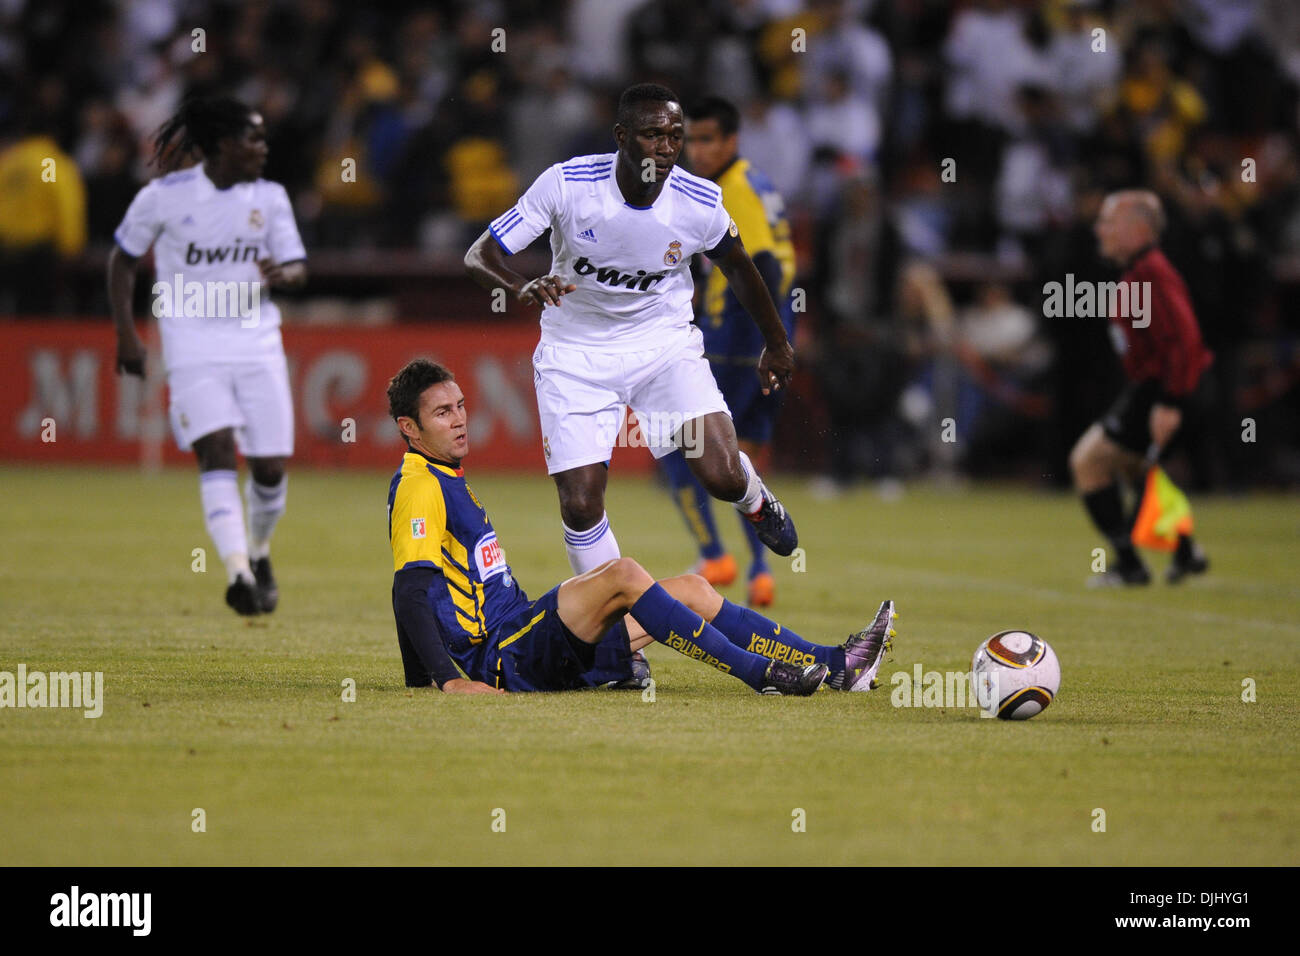 Aug. 04, 2010 - San Francisco, California, U.S - August 4, 2010: Club America M Miguel Layun (19) trips up Real Madrid M Mahamadou Diarra (6) during the friendly between Real Madrid and Club America at Candlestick Park in San Francisco, CA.  Real Madrid took the contest 3-2. (Credit Image: © Matt Cohen/Southcreek Global/ZUMApress.com) Stock Photo